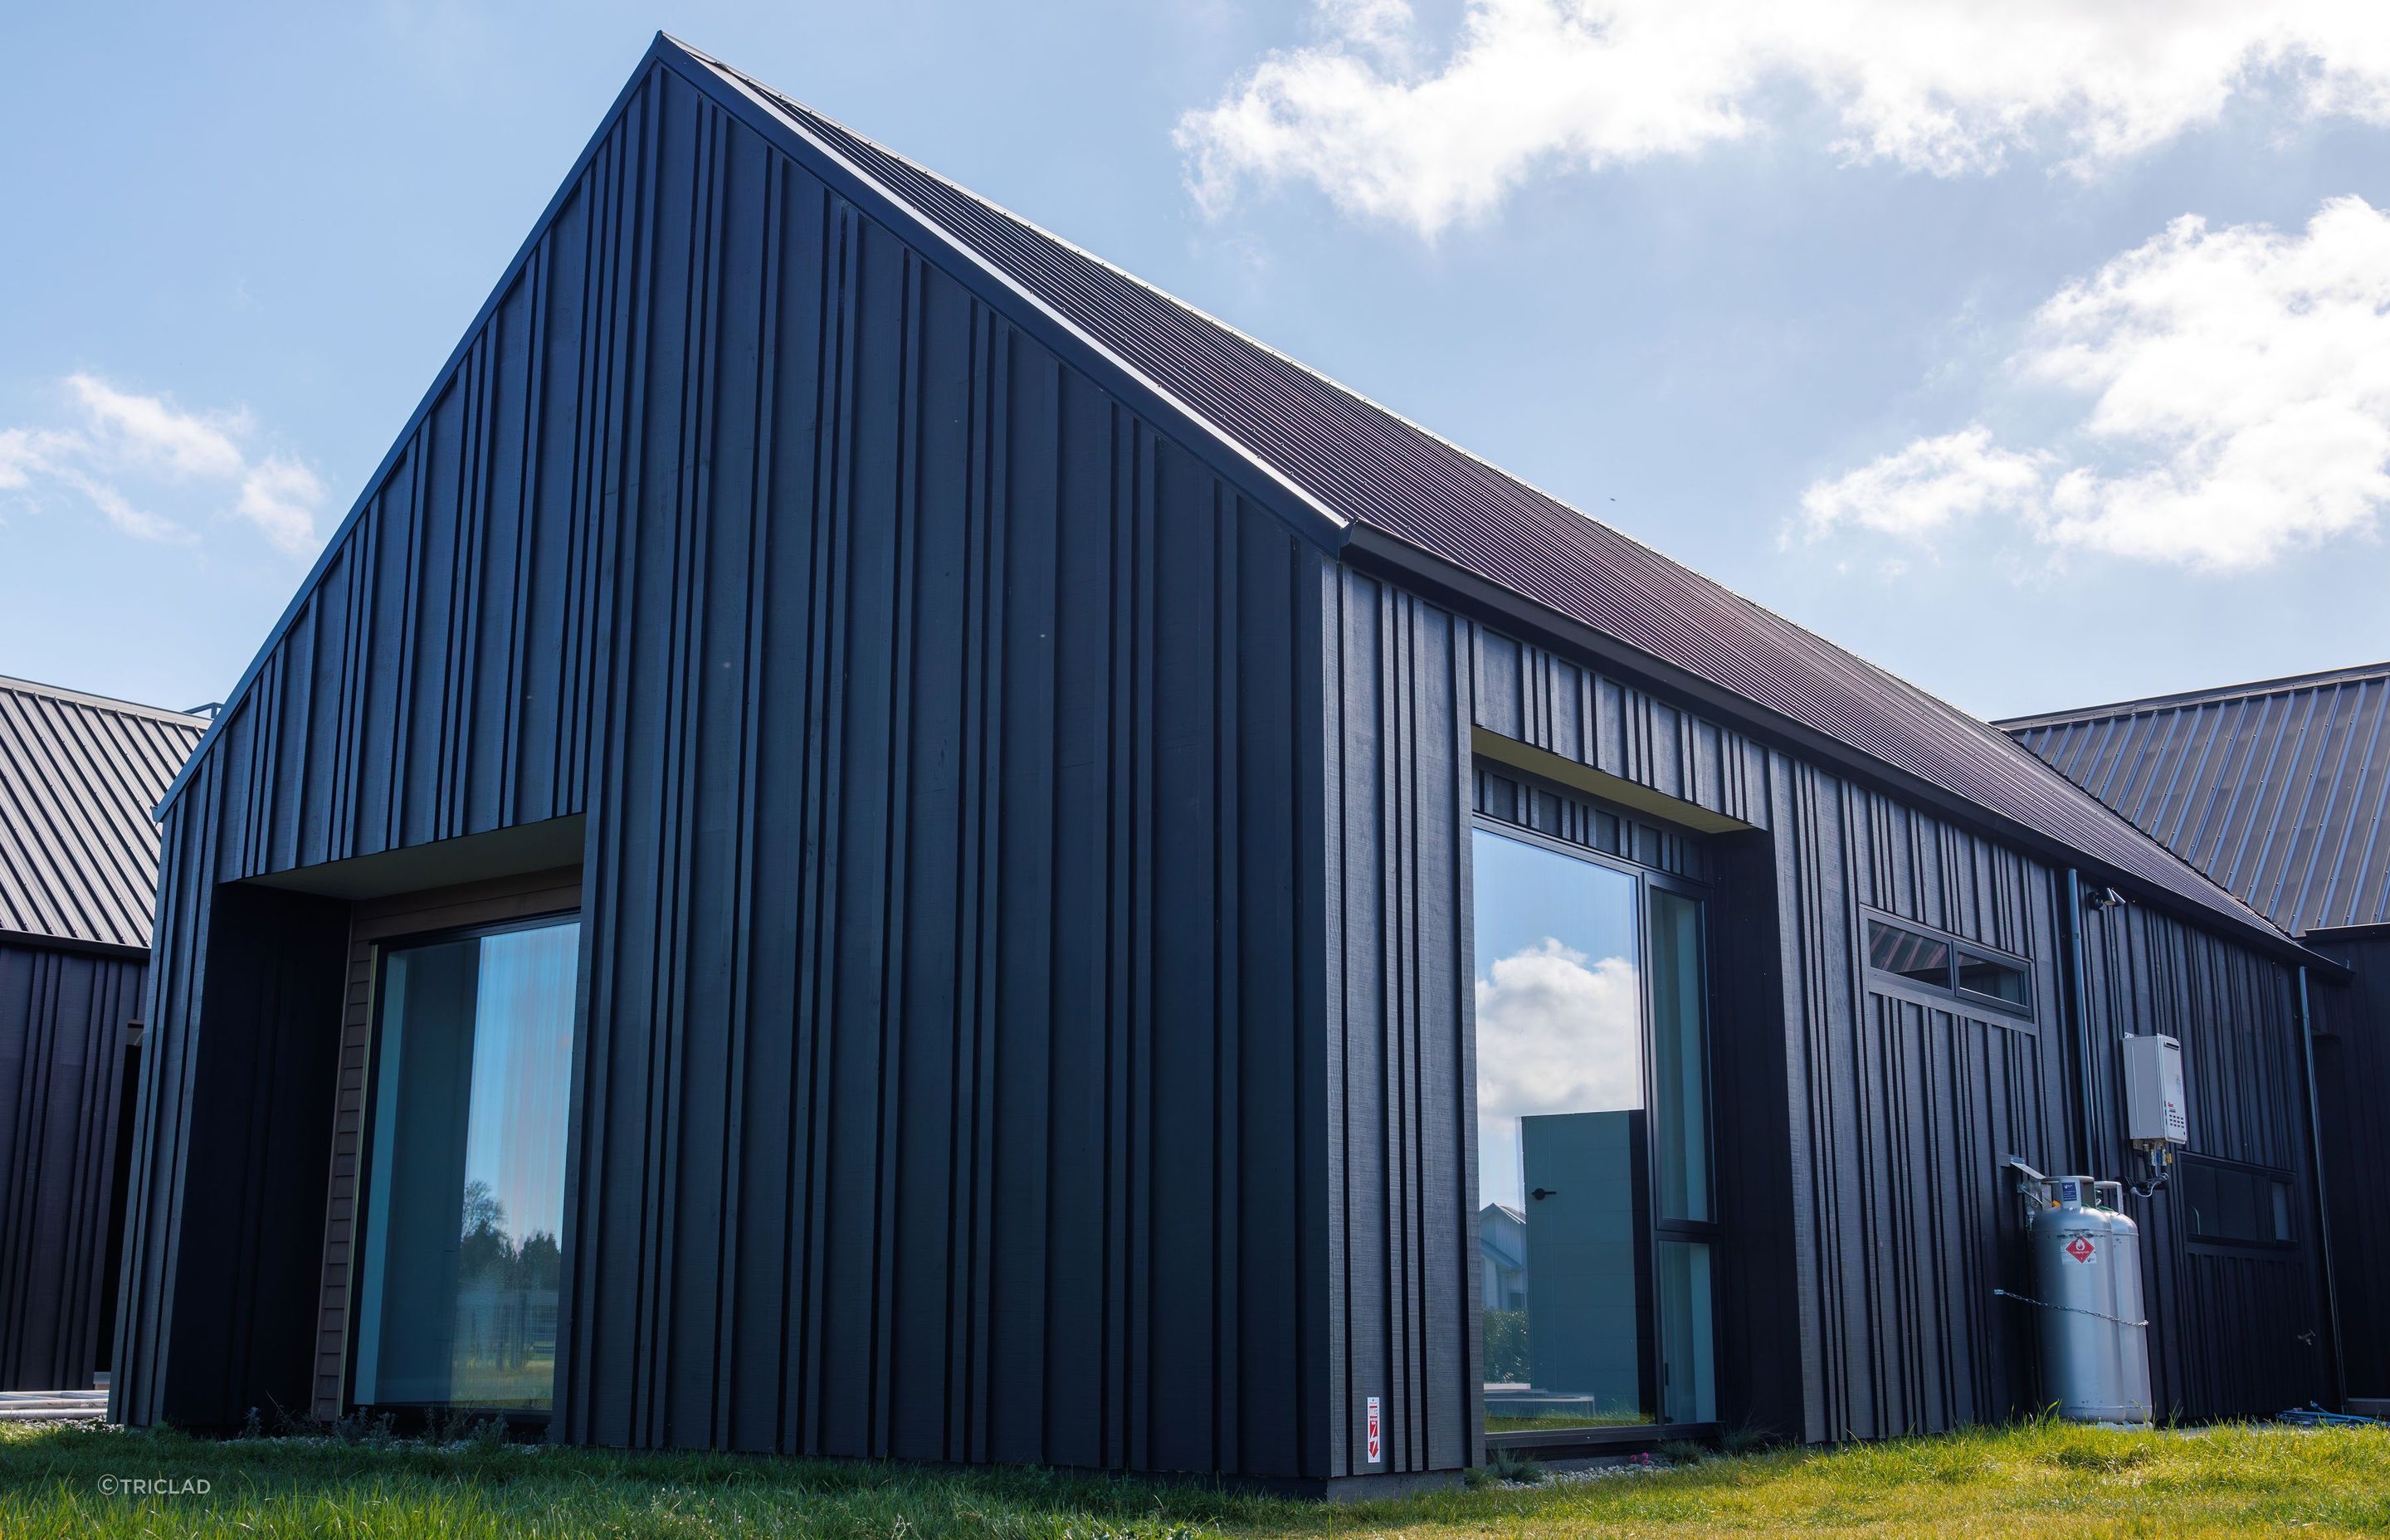 Triclad offers a timeless range of environmentally sustainable Kiwi timber cladding, designed to last.